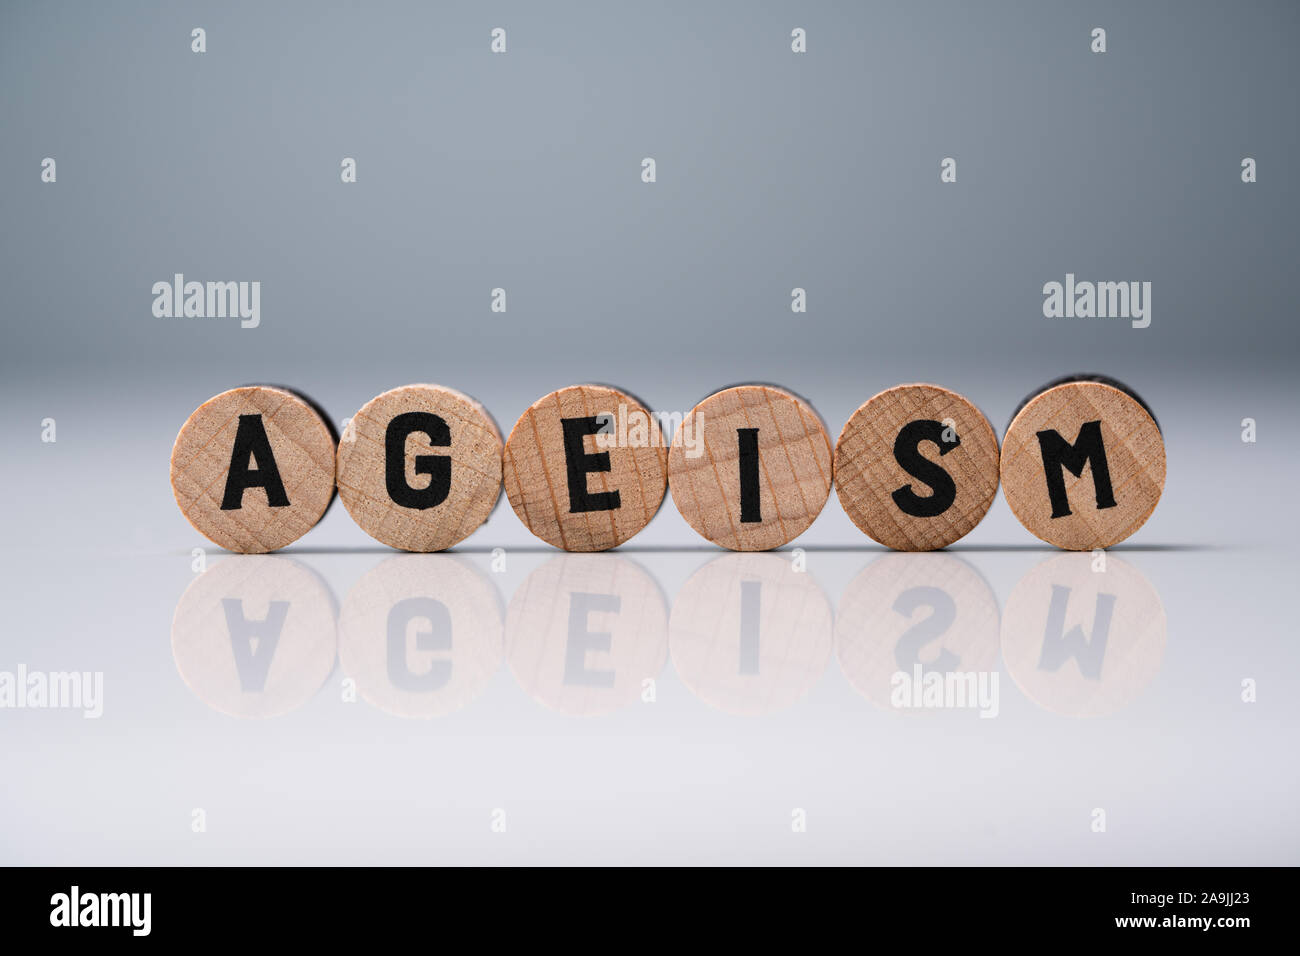 Ageism Text On Round Wooden Blocks Over Reflective White Desk Stock Photo